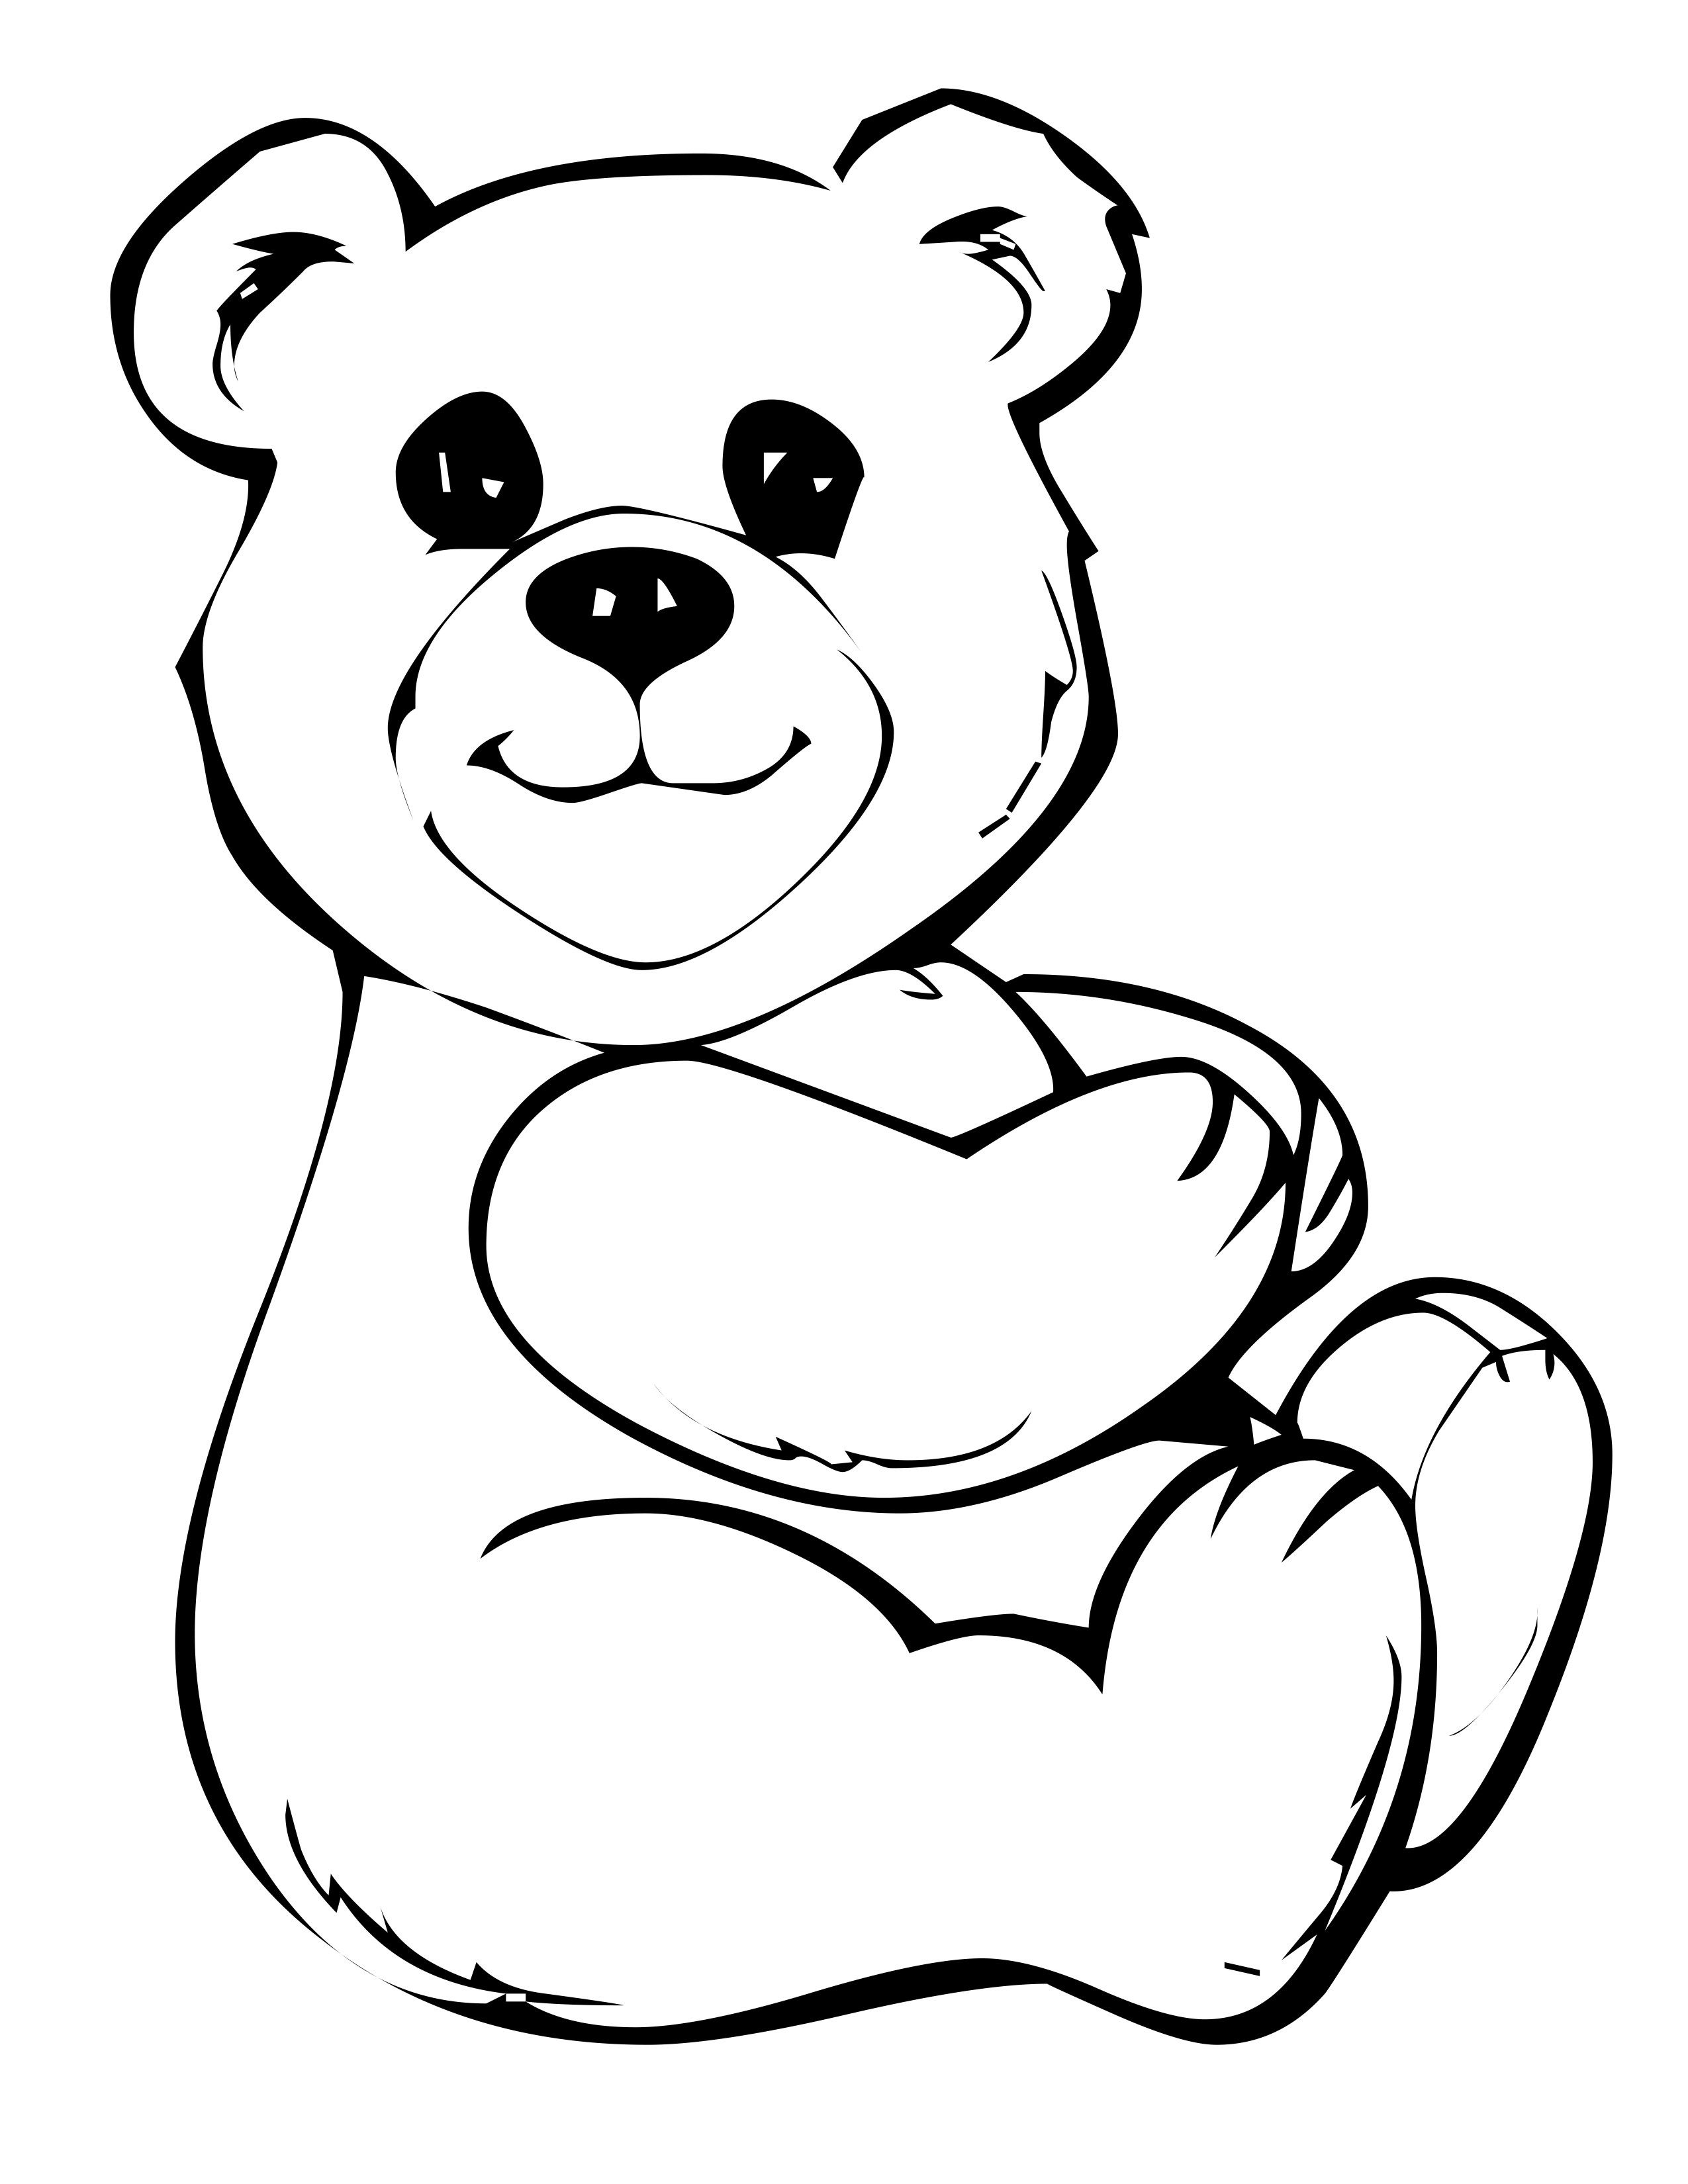 Study Free Printable Teddy Bear Coloring Pages For Kids | Kids - Teddy Bear Coloring Pages Free Printable